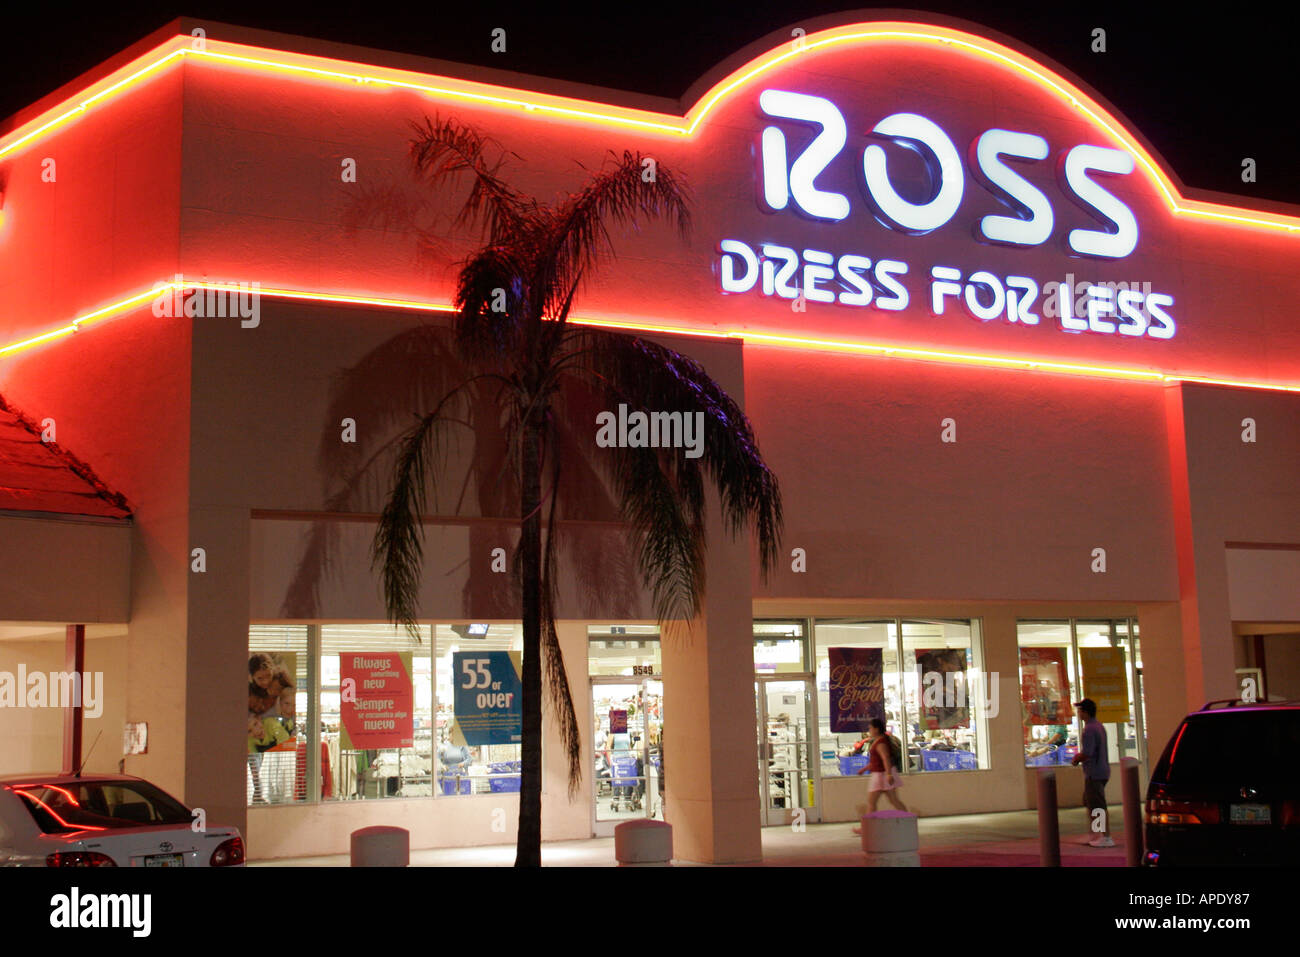 Miami Florida,Ross Dress For Less,lighted sign,information,advertise,night  nightlife evening after dark,visitors travel traveling tour tourist tourism  Stock Photo - Alamy